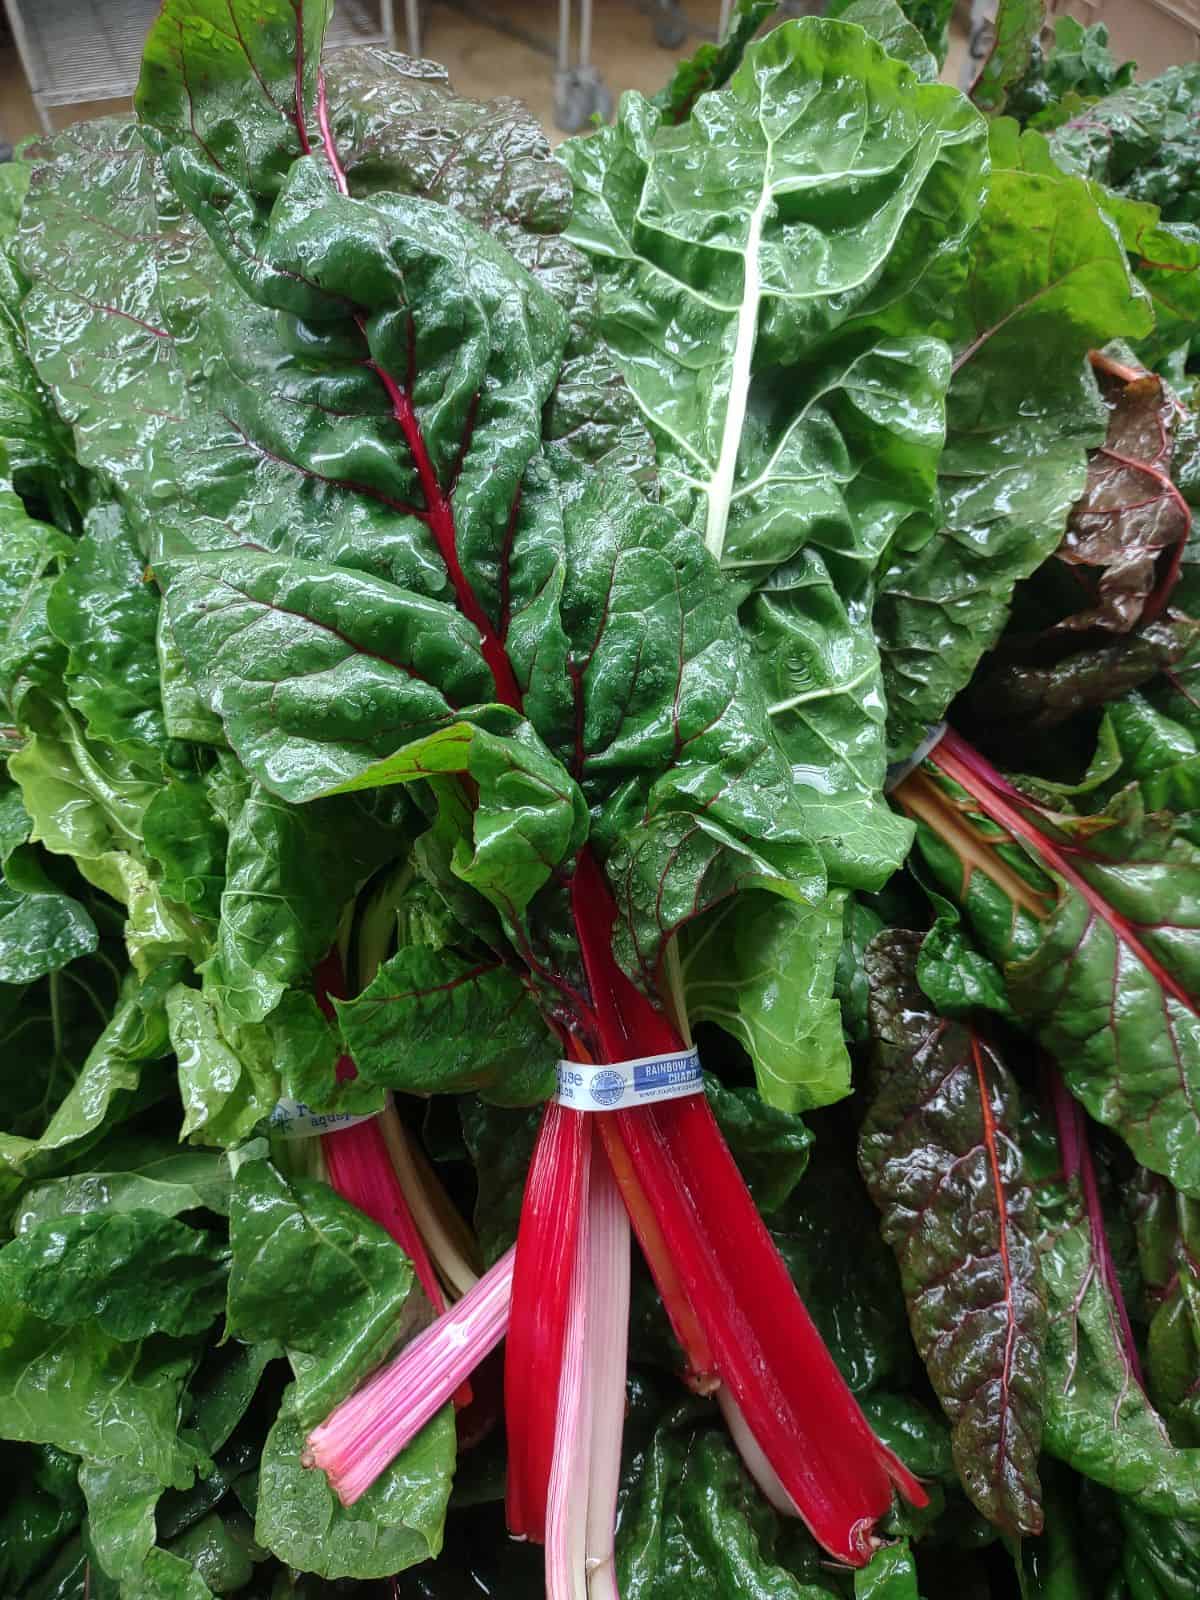 Bunches of red and pink stem swiss chard at a grocery store.